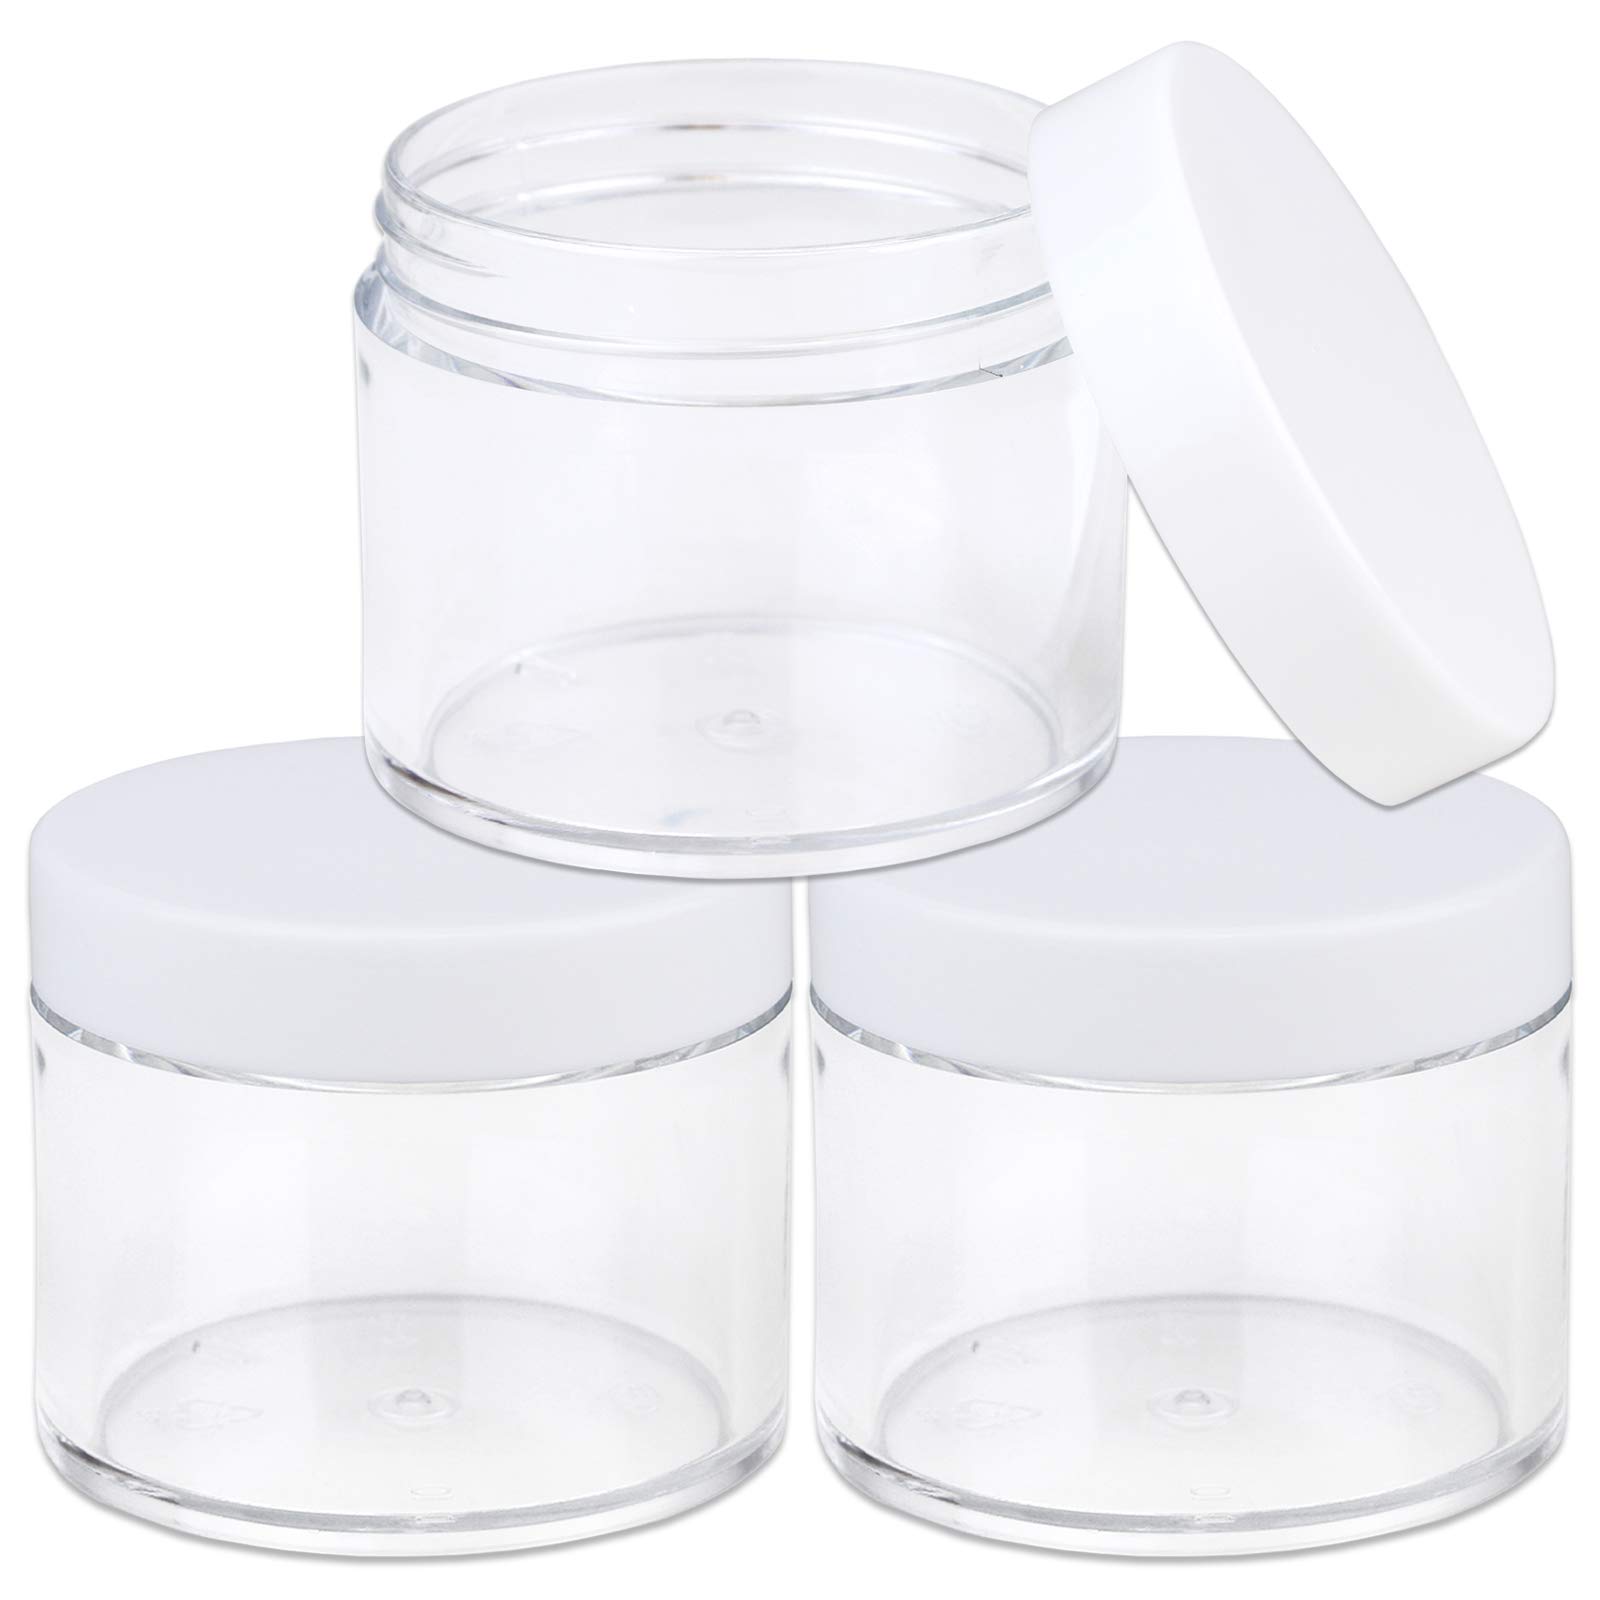 Beauticom 60 Grams/60 ML (2 Oz) Round Clear Plastic Container Jars with White Lids Storage Makeup Cosmetic Lotion Scrubs (3 Jars)